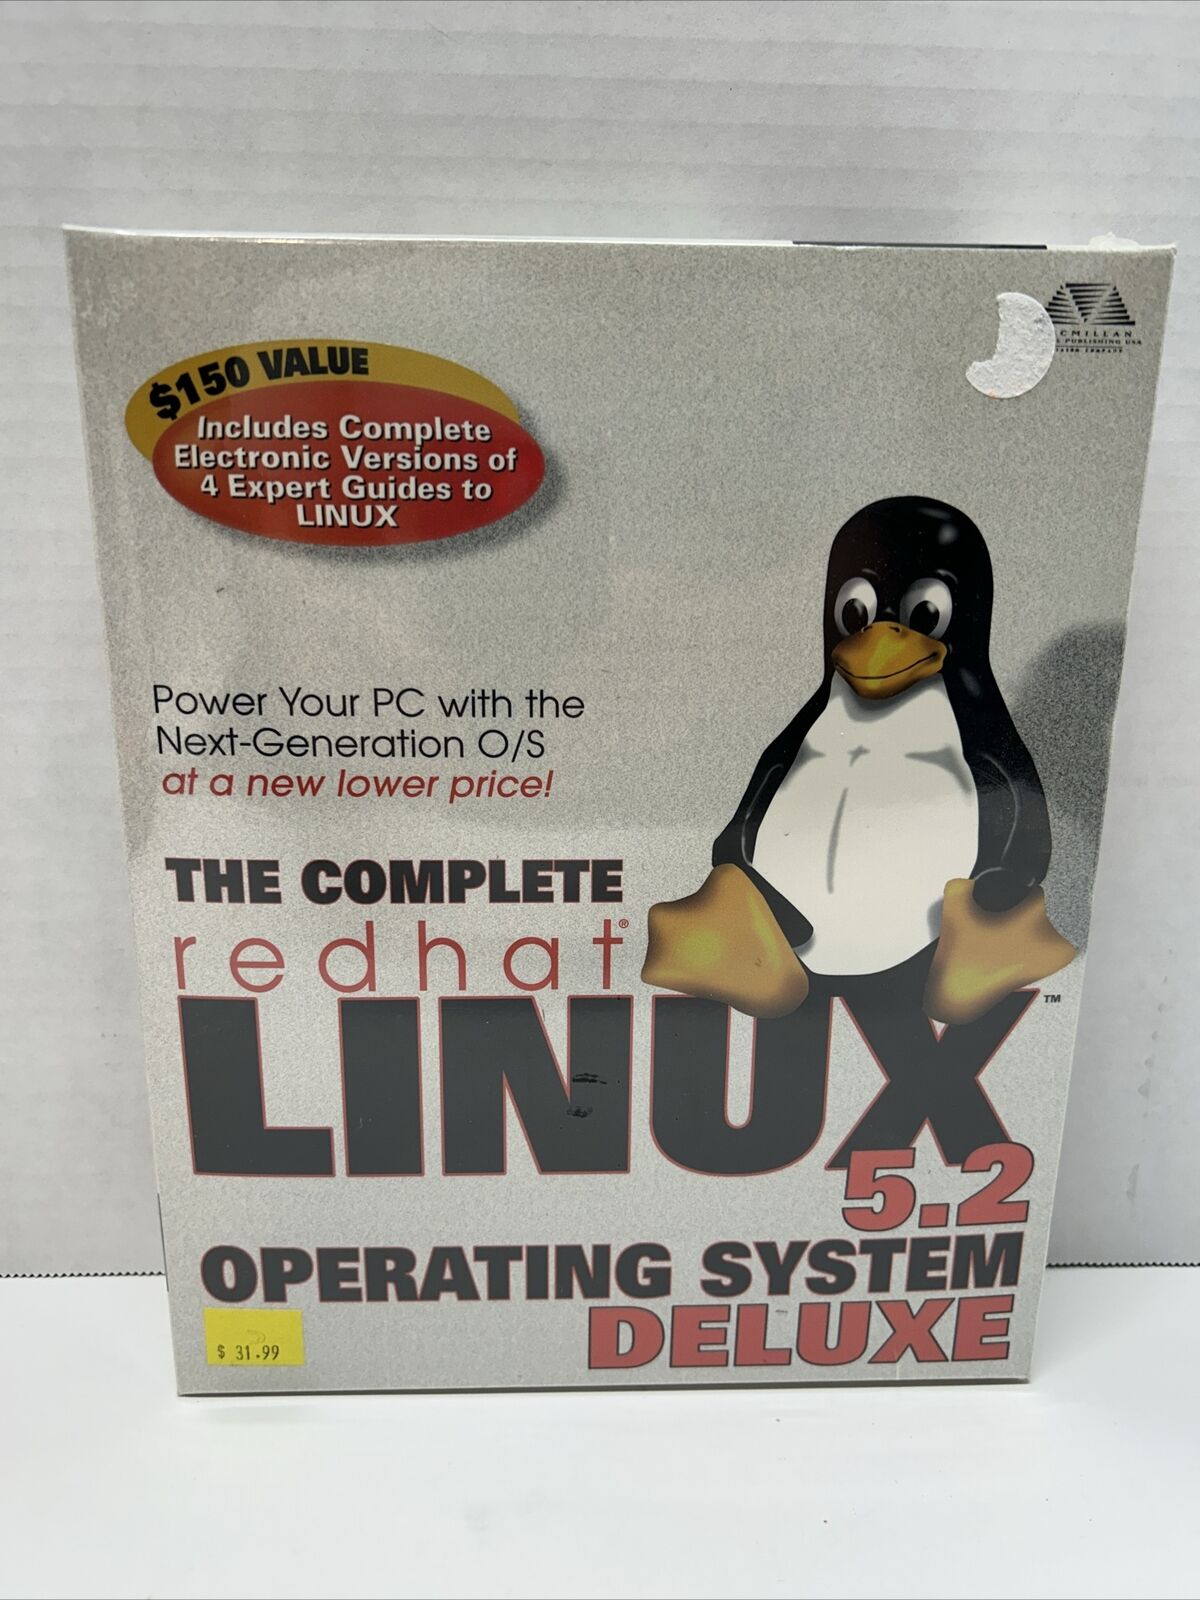 The Complete Redhat Linux 5.2 Operating System Deluxe CD Software Installer